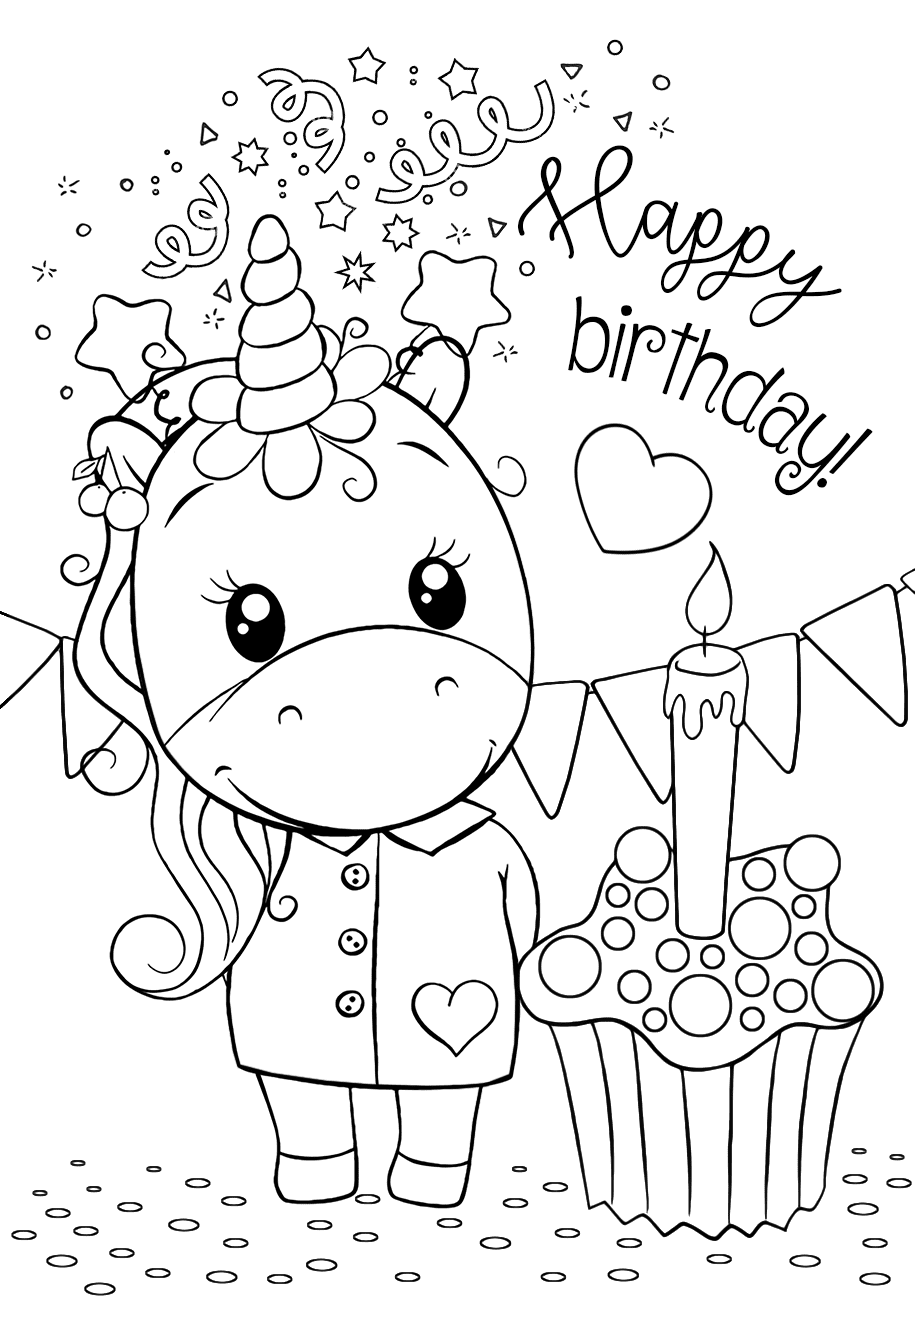 lol-happy-birthday-coloring-pages